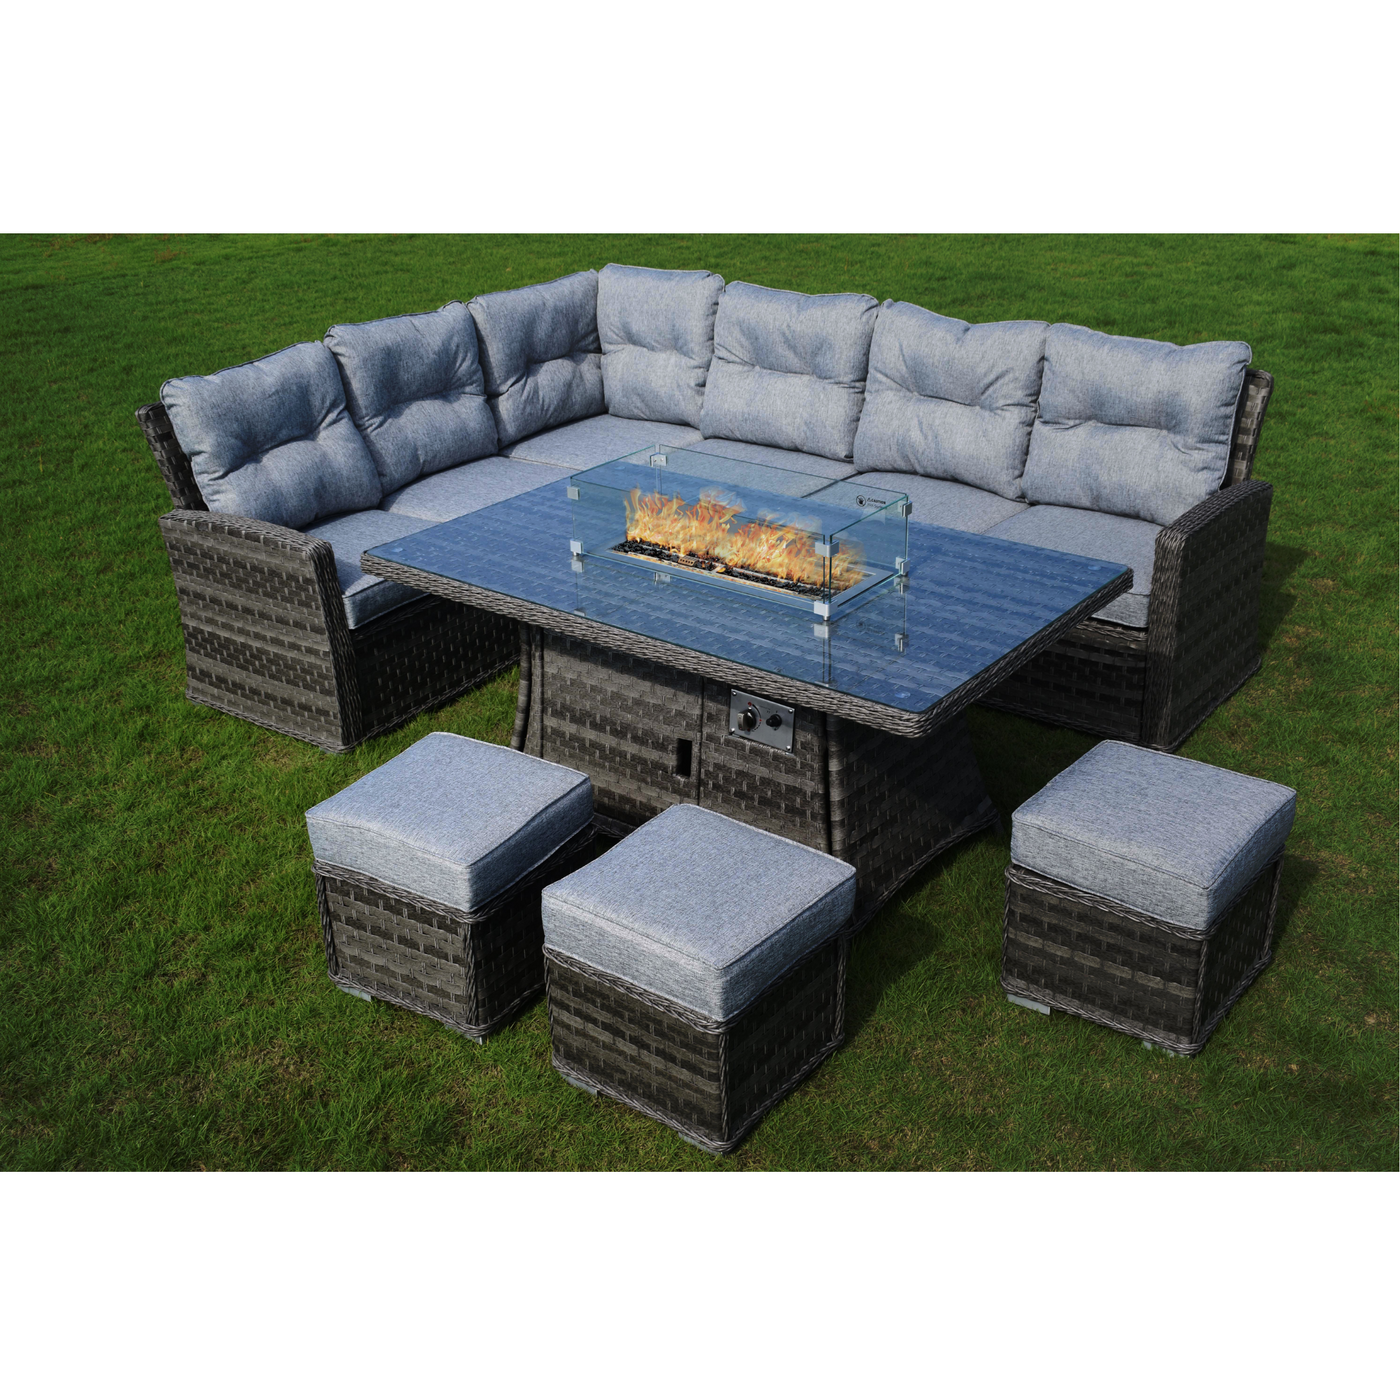 AMALFI CASUAL OUTDOOR FURNITURE SOFA DINING SET WITH FIREPIT